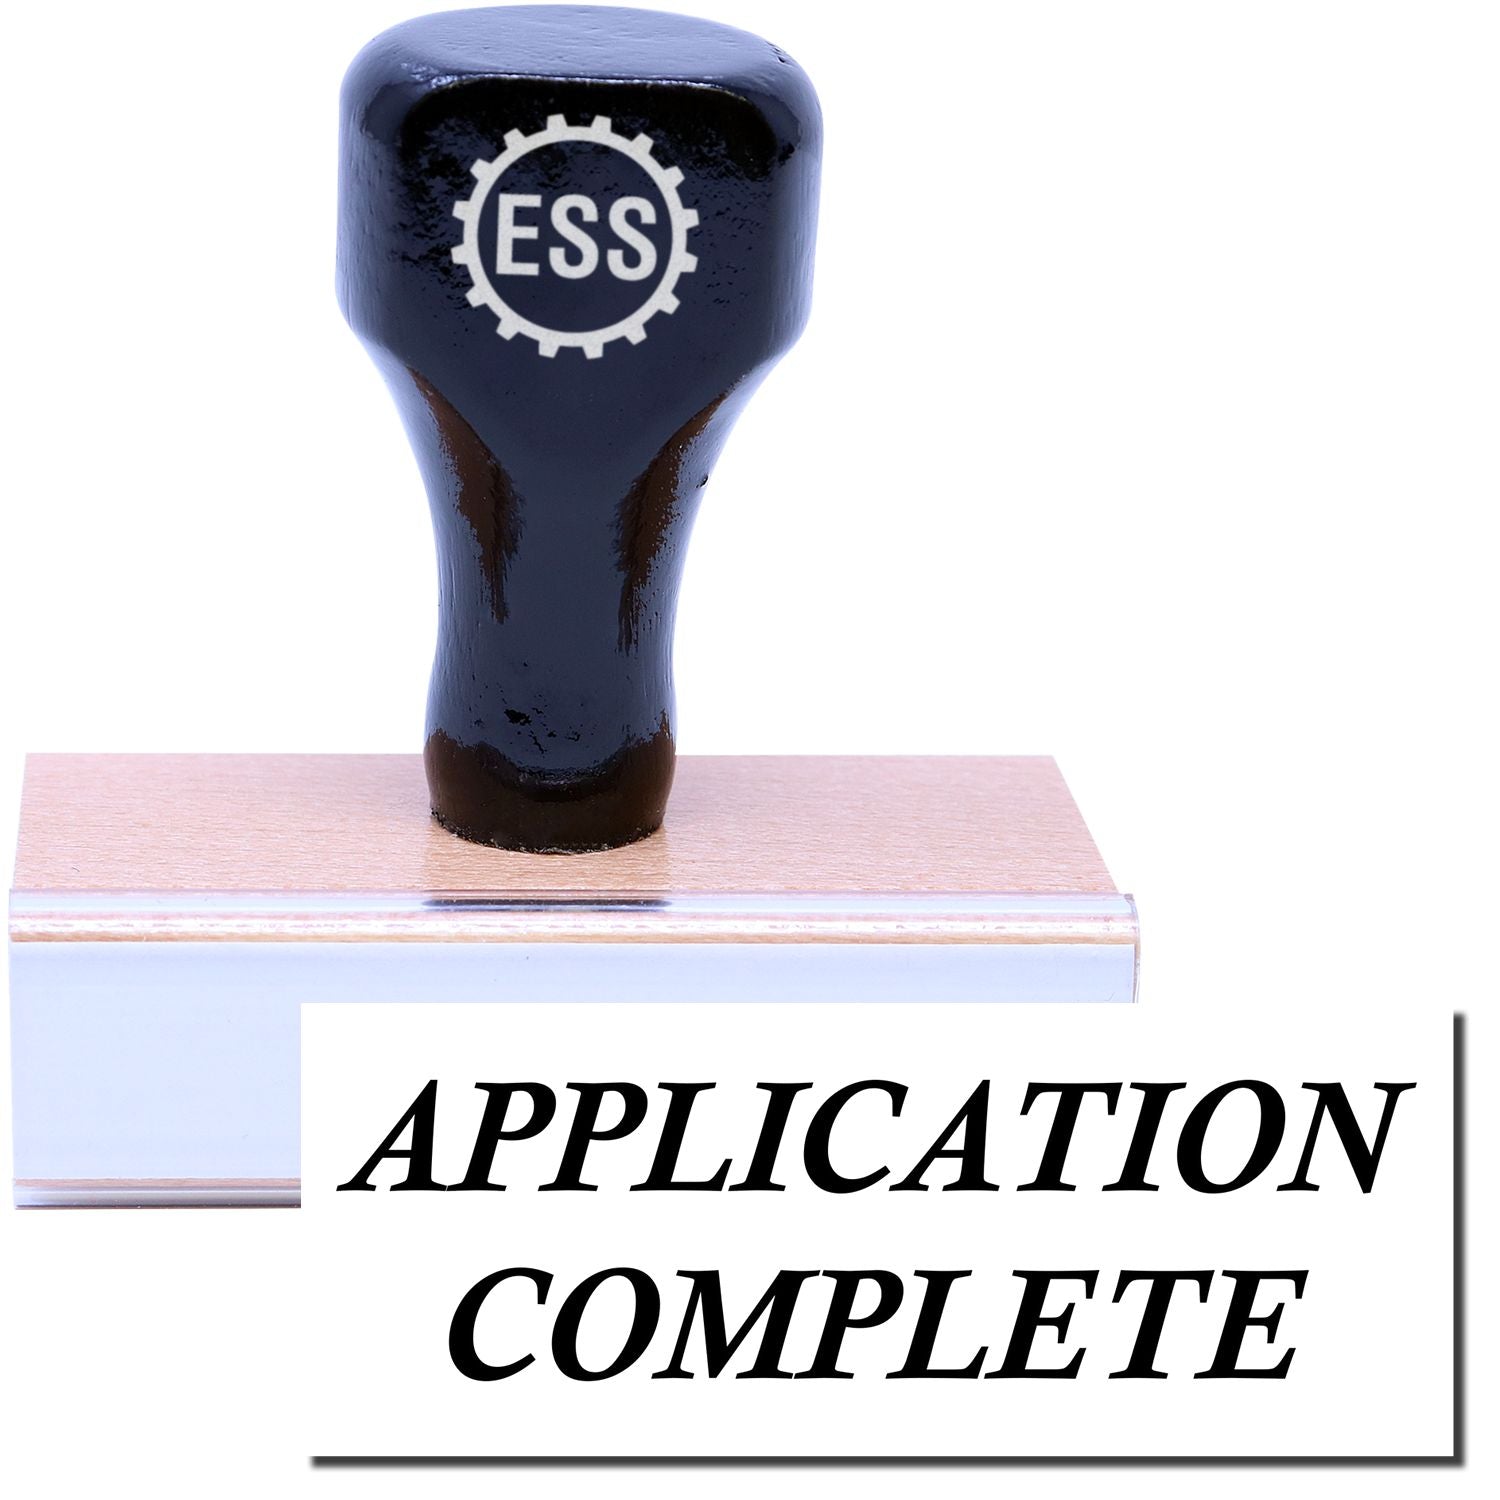 A stock office rubber stamp with a stamped image showing how the text "APPLICATION COMPLETE" is displayed after stamping.